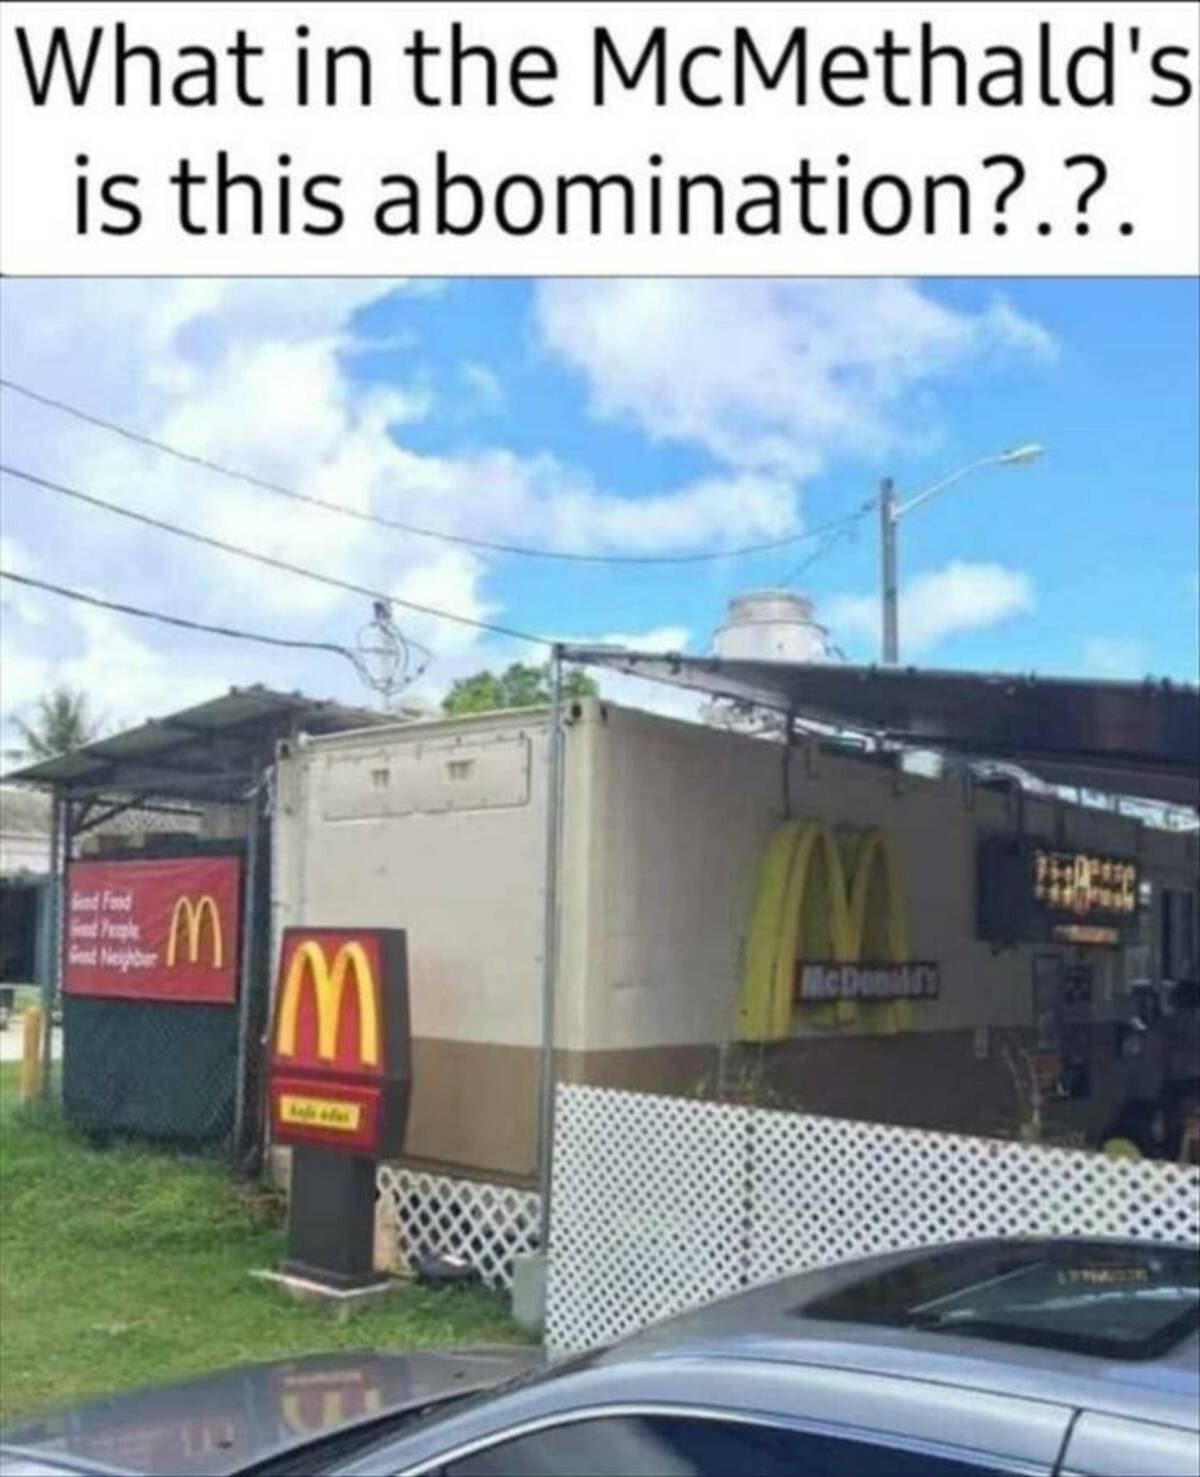 mcdonald's trailer park - What in the McMethald's is this abomination?.?. nd Food People Get Neighbor M M McDonald